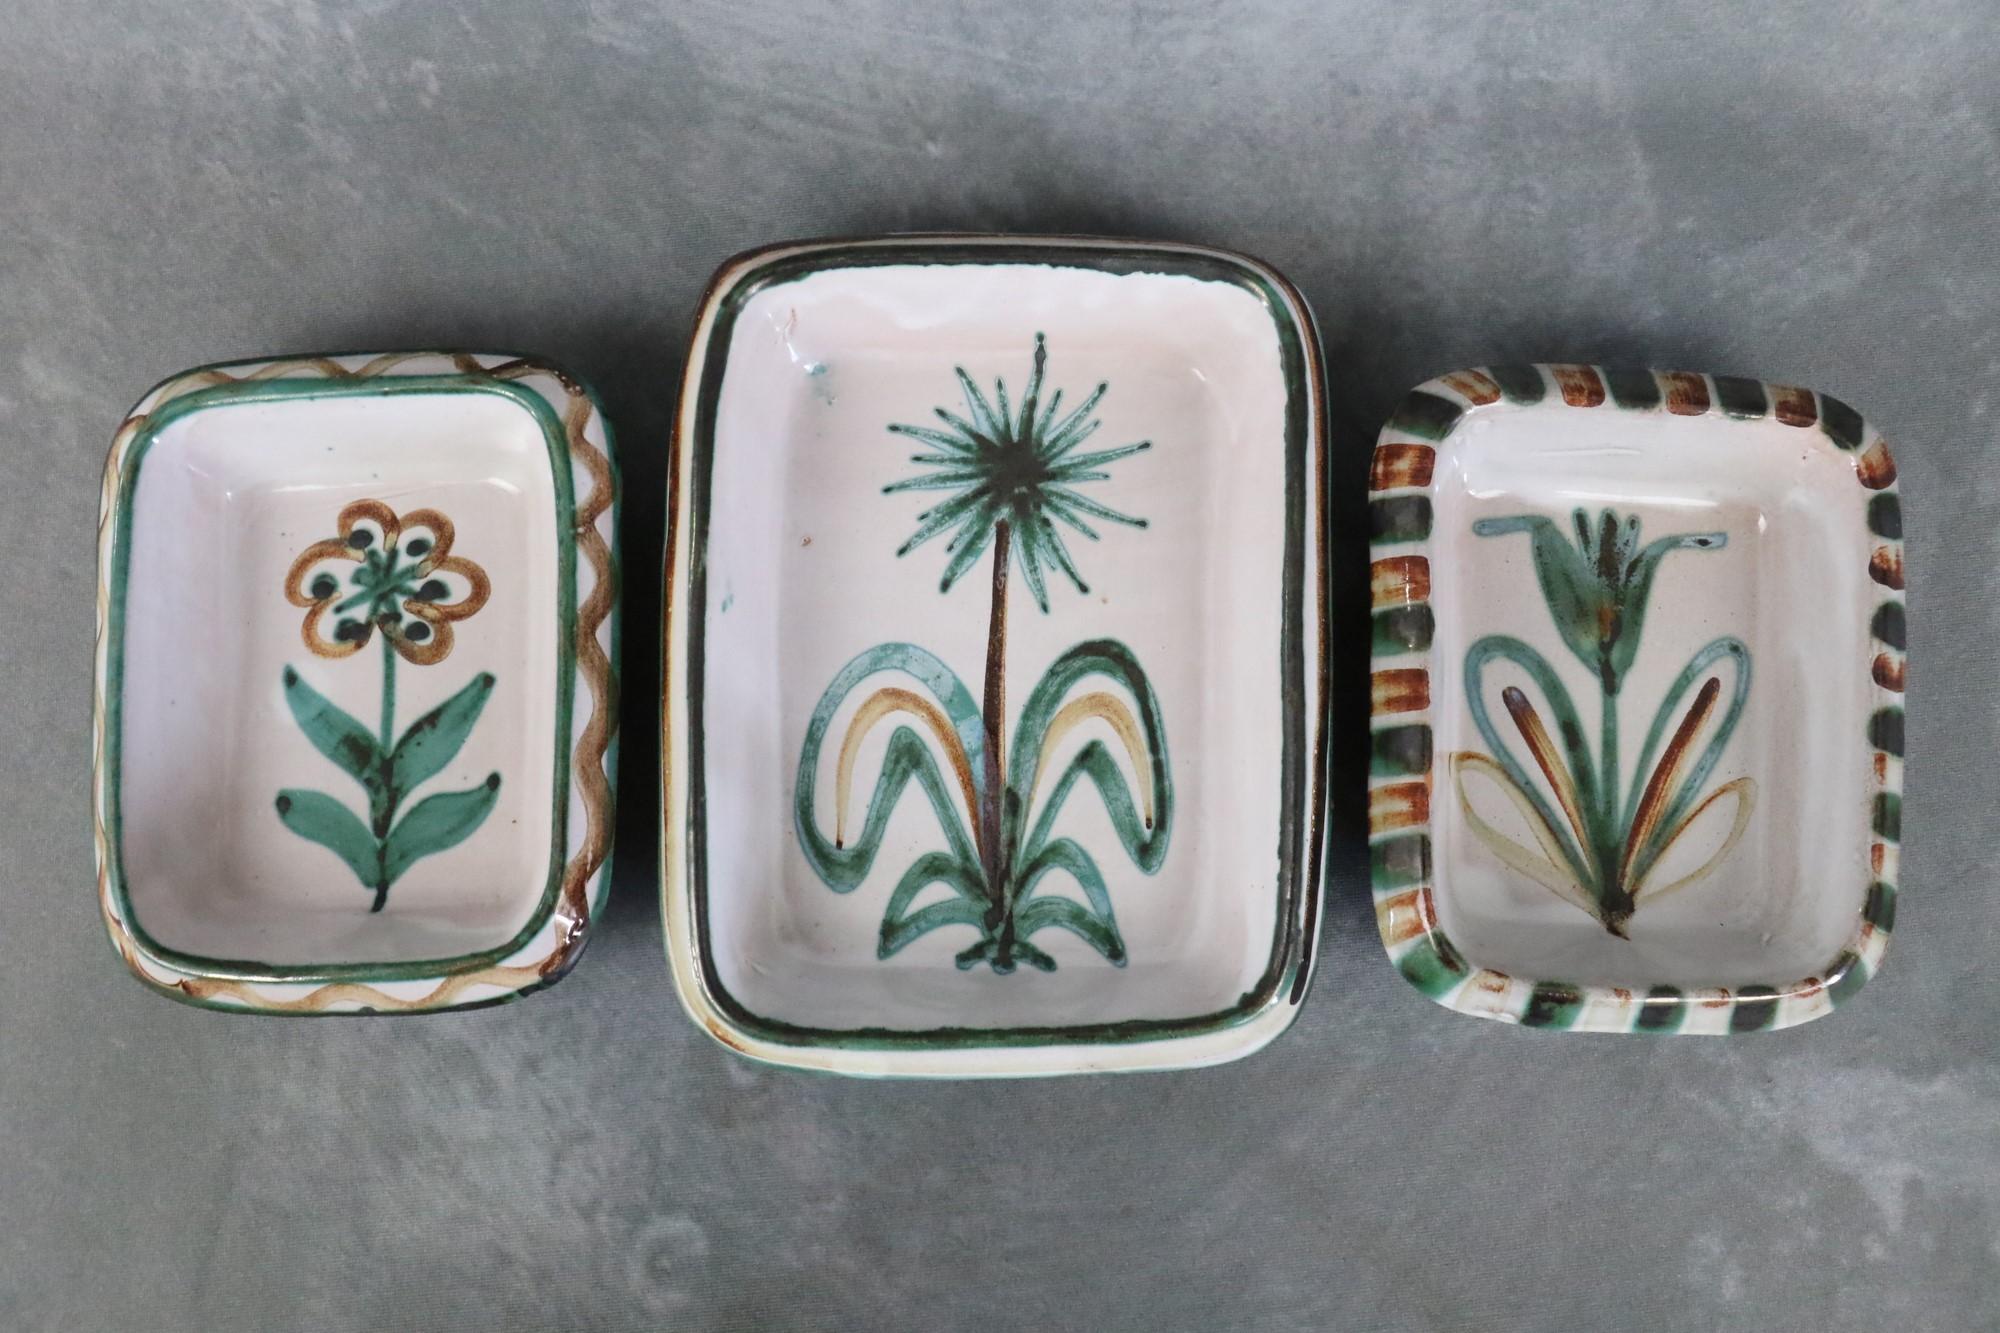 Mid-20th Century Set of 3 Ceramic Dishes by Robert Picault, Vallauris, French Ceramic, 1950's For Sale